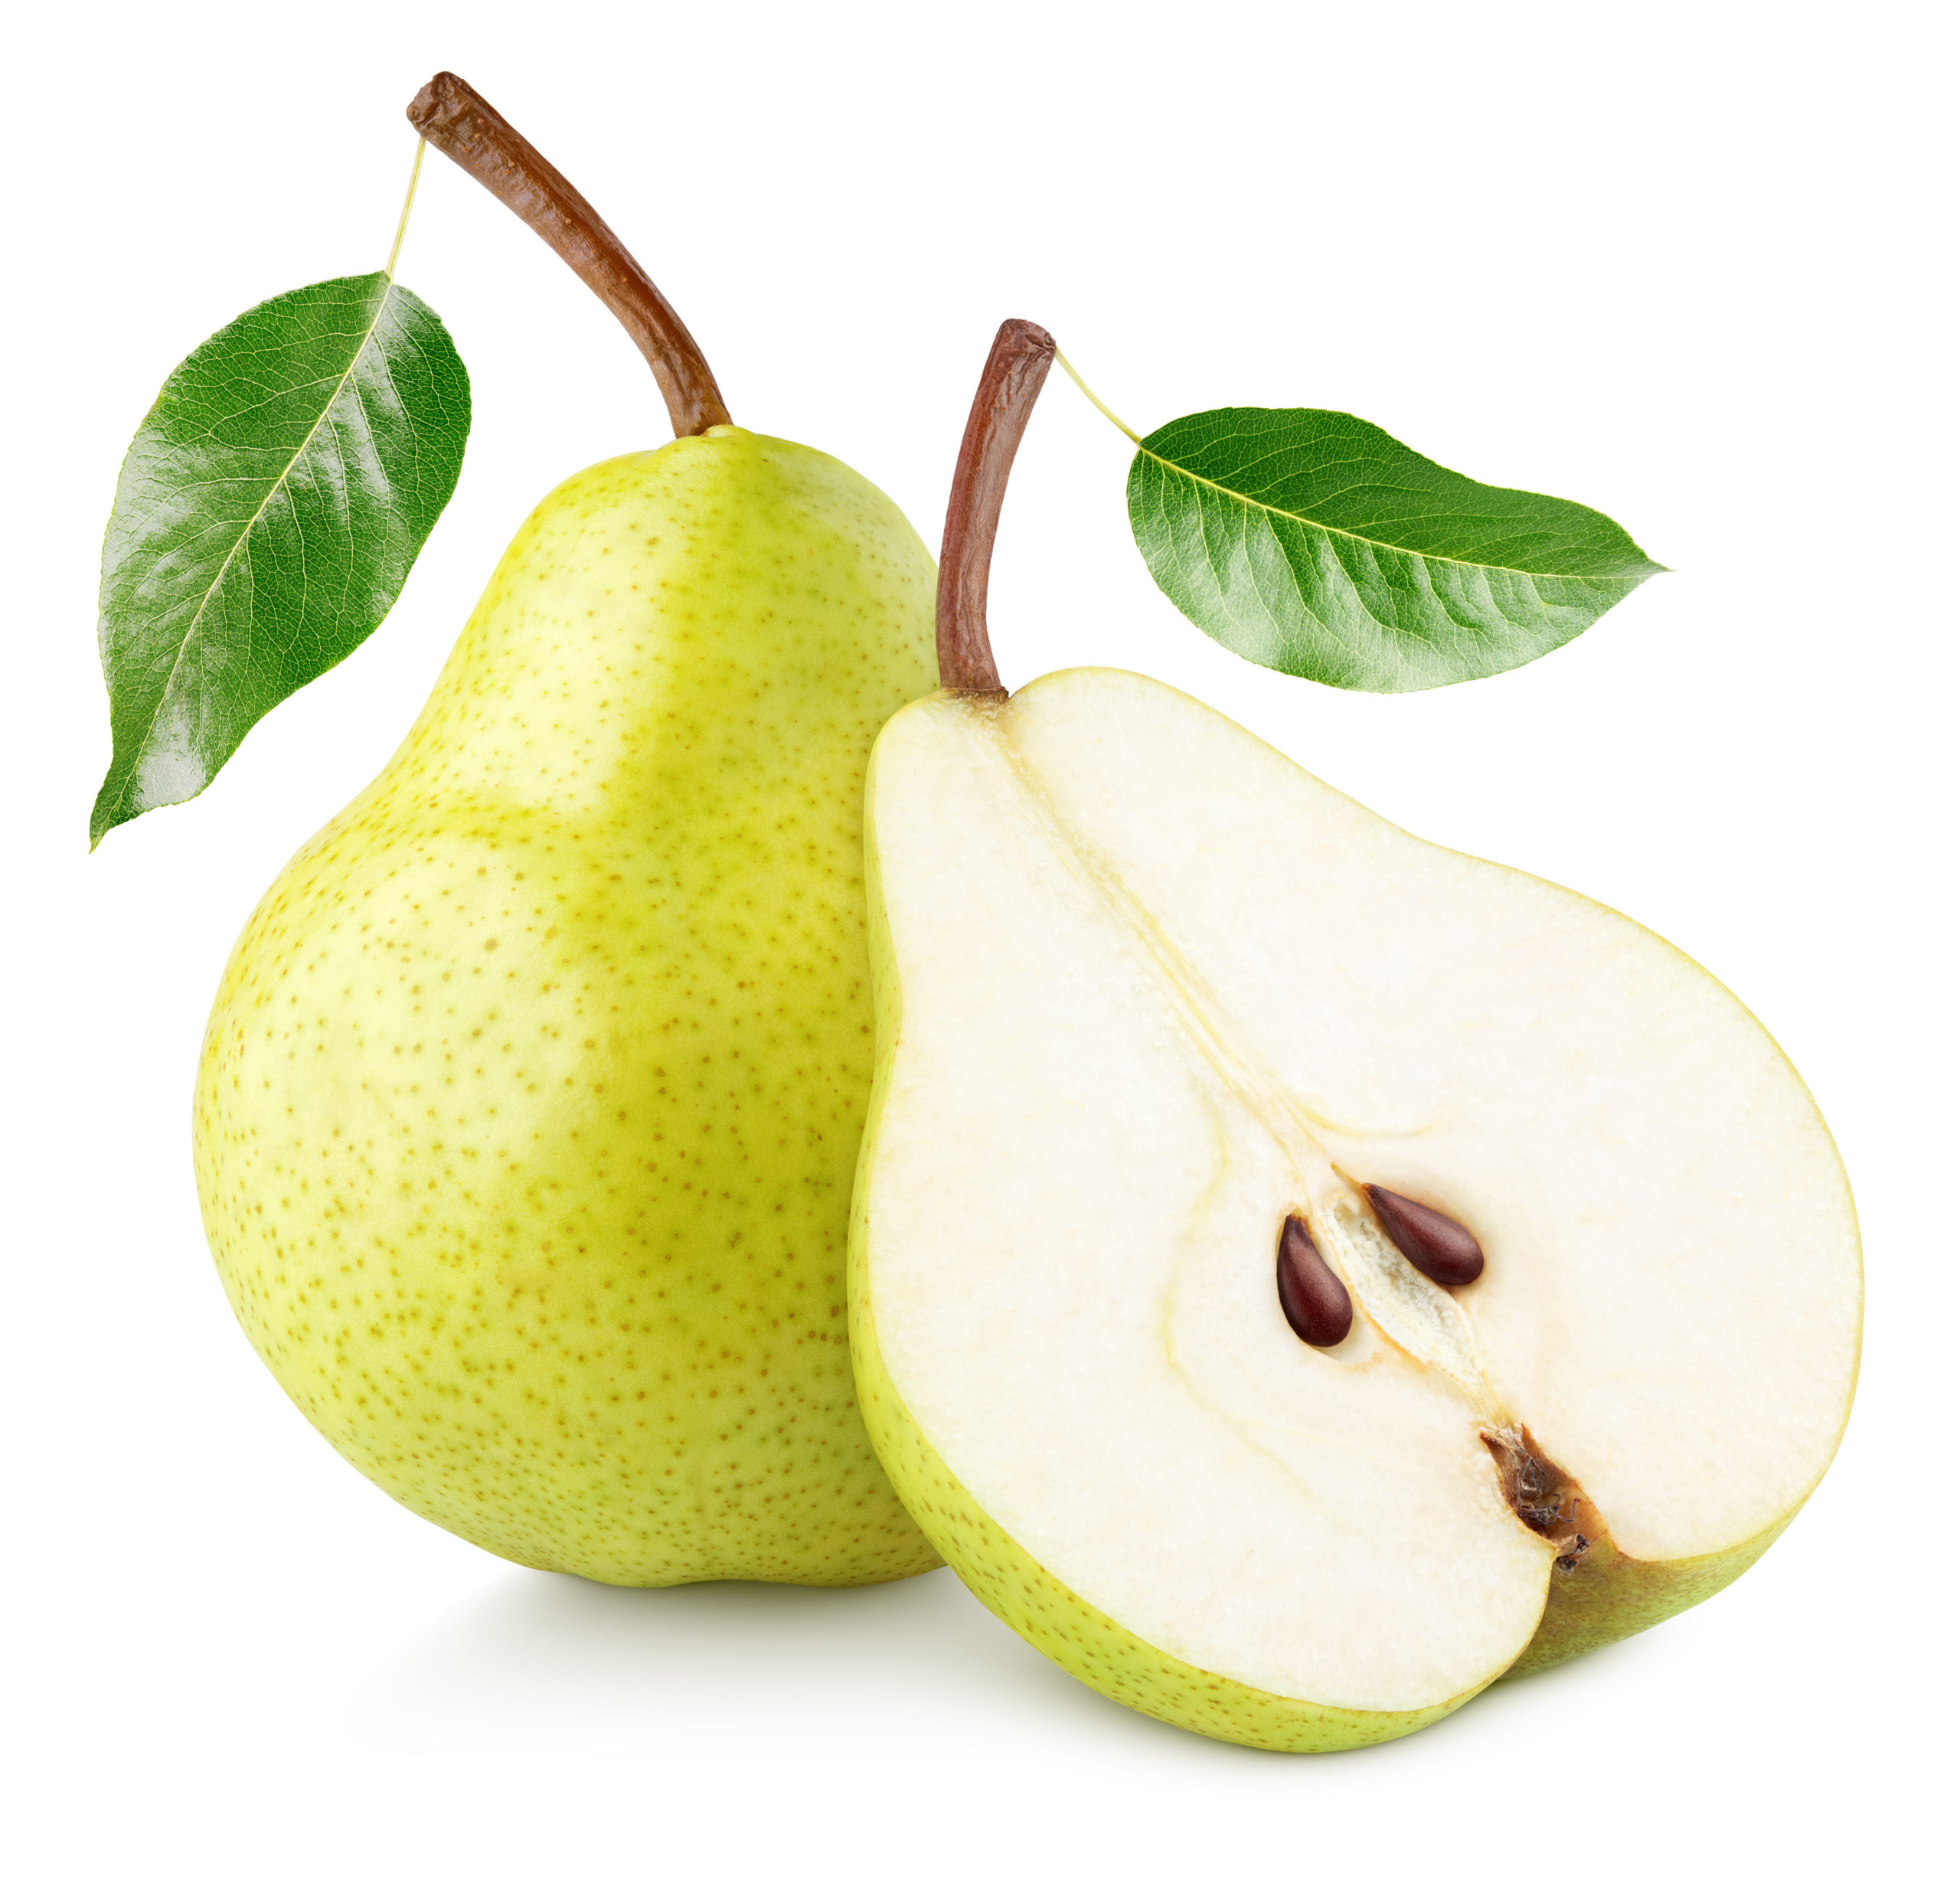 Isolated image of pears |  Fruits to lose weight